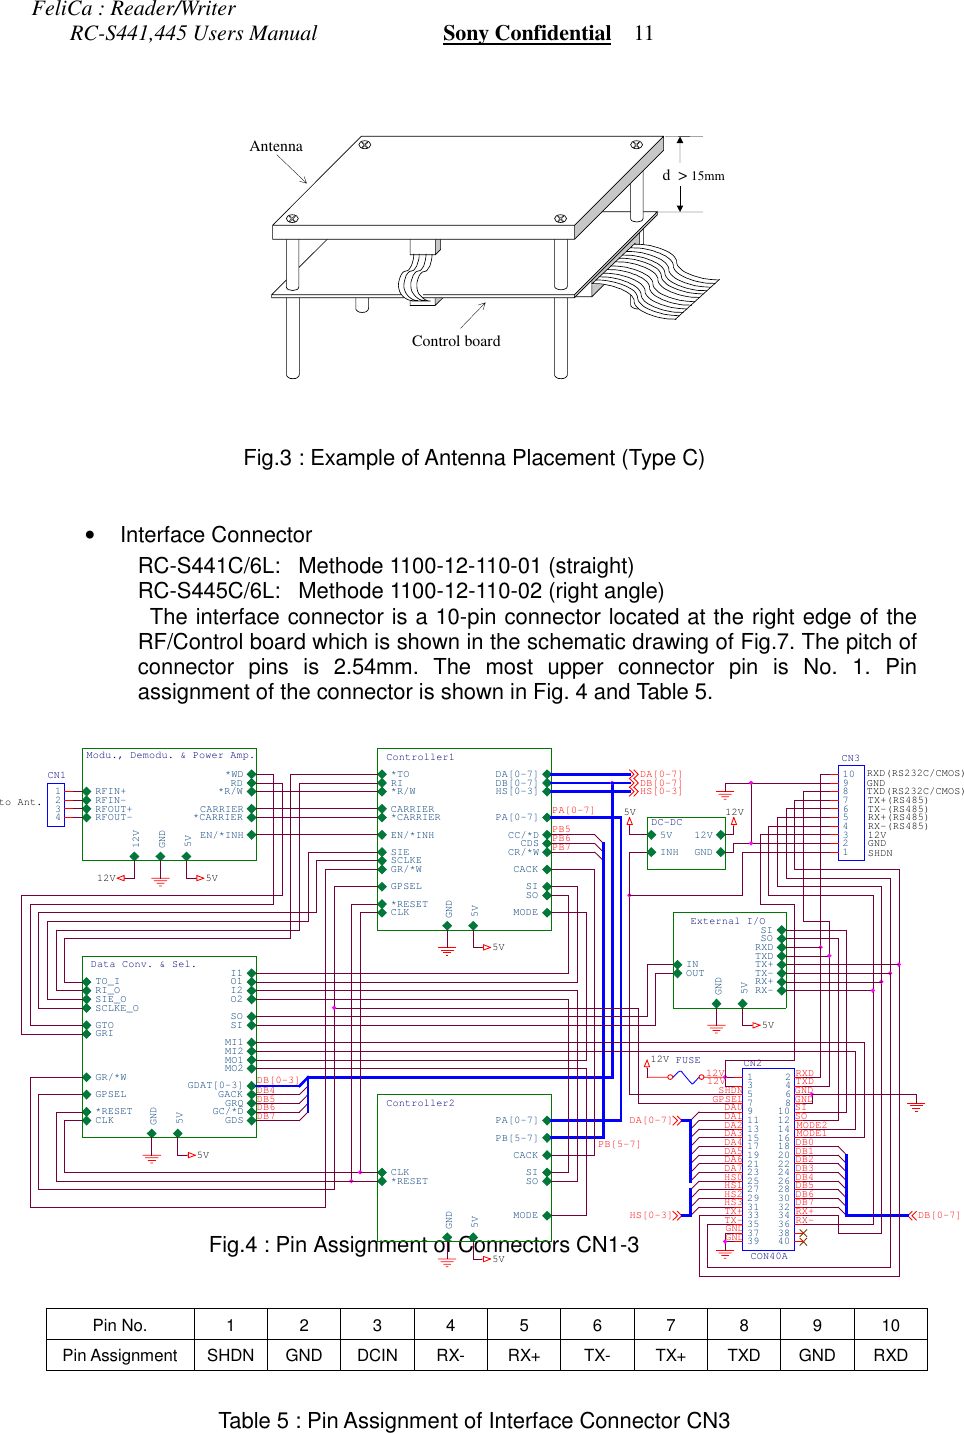 FeliCa : Reader/Writer       RC-S441,445 Users Manual                       Sony Confidential    11Fig.3 : Example of Antenna Placement (Type C)•Interface ConnectorRC-S441C/6L:   Methode 1100-12-110-01 (straight)RC-S445C/6L:   Methode 1100-12-110-02 (right angle) The interface connector is a 10-pin connector located at the right edge of theRF/Control board which is shown in the schematic drawing of Fig.7. The pitch ofconnector pins is 2.54mm. The most upper connector pin is No. 1. Pinassignment of the connector is shown in Fig. 4 and Table 5.                      Fig.4 : Pin Assignment of Connectors CN1-3  Pin No. 12345678910Pin Assignment SHDN GND DCIN RX- RX+ TX- TX+ TXD GND RXD Table 5 : Pin Assignment of Interface Connector CN3  AntennaControl boardd  &gt; 15mmExternal I/OTX+TX-RX+RX-5VGNDOUTIN TXDRXDSISOModu., Demodu. &amp; Power Amp.*R/WRD*WDGND5VCARRIER*CARRIER12VRFIN+RFIN-RFOUT+RFOUT-EN/*INHController1SISOMODE5V*TORI*R/WCARRIER*CARRIEREN/*INHGNDDA[0-7]DB[0-7]HS[0-3]PA[0-7]GPSELCLKSIESCLKECC/*DCDSCR/*W*RESETCACKGR/*WData Conv. &amp; Sel.GDAT[0-3]GPSEL5VGNDTO_IRI_OSCLKE_OSIE_OGACKGRQGC/*DGTOGRIGDSCLK*RESETGR/*WO1I1O2I2MI1MI2MO1MO2SOSIController2SISOMODE5VCLKGNDPA[0-7]PB[5-7]*RESETCACKDC-DC12V5VGNDINH5V5V5V12V5V5V5V12V12VDB[0-7]HS[0-3]DB[0-7]DA[0-7]HS[0-3]DA[0-7]SHDNTX+(RS485)TX-(RS485)GNDRXD(RS232C/CMOS)RX-(RS485)12VRX+(RS485)TXD(RS232C/CMOS)GNDto Ant.PB6PB5PB[5-7]PB7PA[0-7]TXDDB7DB2DB6DA7RX-DA0DB7DB1DA6MODE1DB5DA3DB3DA1 MODE2SOSIDB[0-3]DA2RX+GNDHS2DA5HS0GNDHS1DA4RXDTX+TX-DB6DB0DB4DB4GNDHS3GPSELGNDSHDNDB512V12VCN312345678910CN11234CN2CON40A13579111315171921232527293133353739246810121416182022242628303234363840FUSE